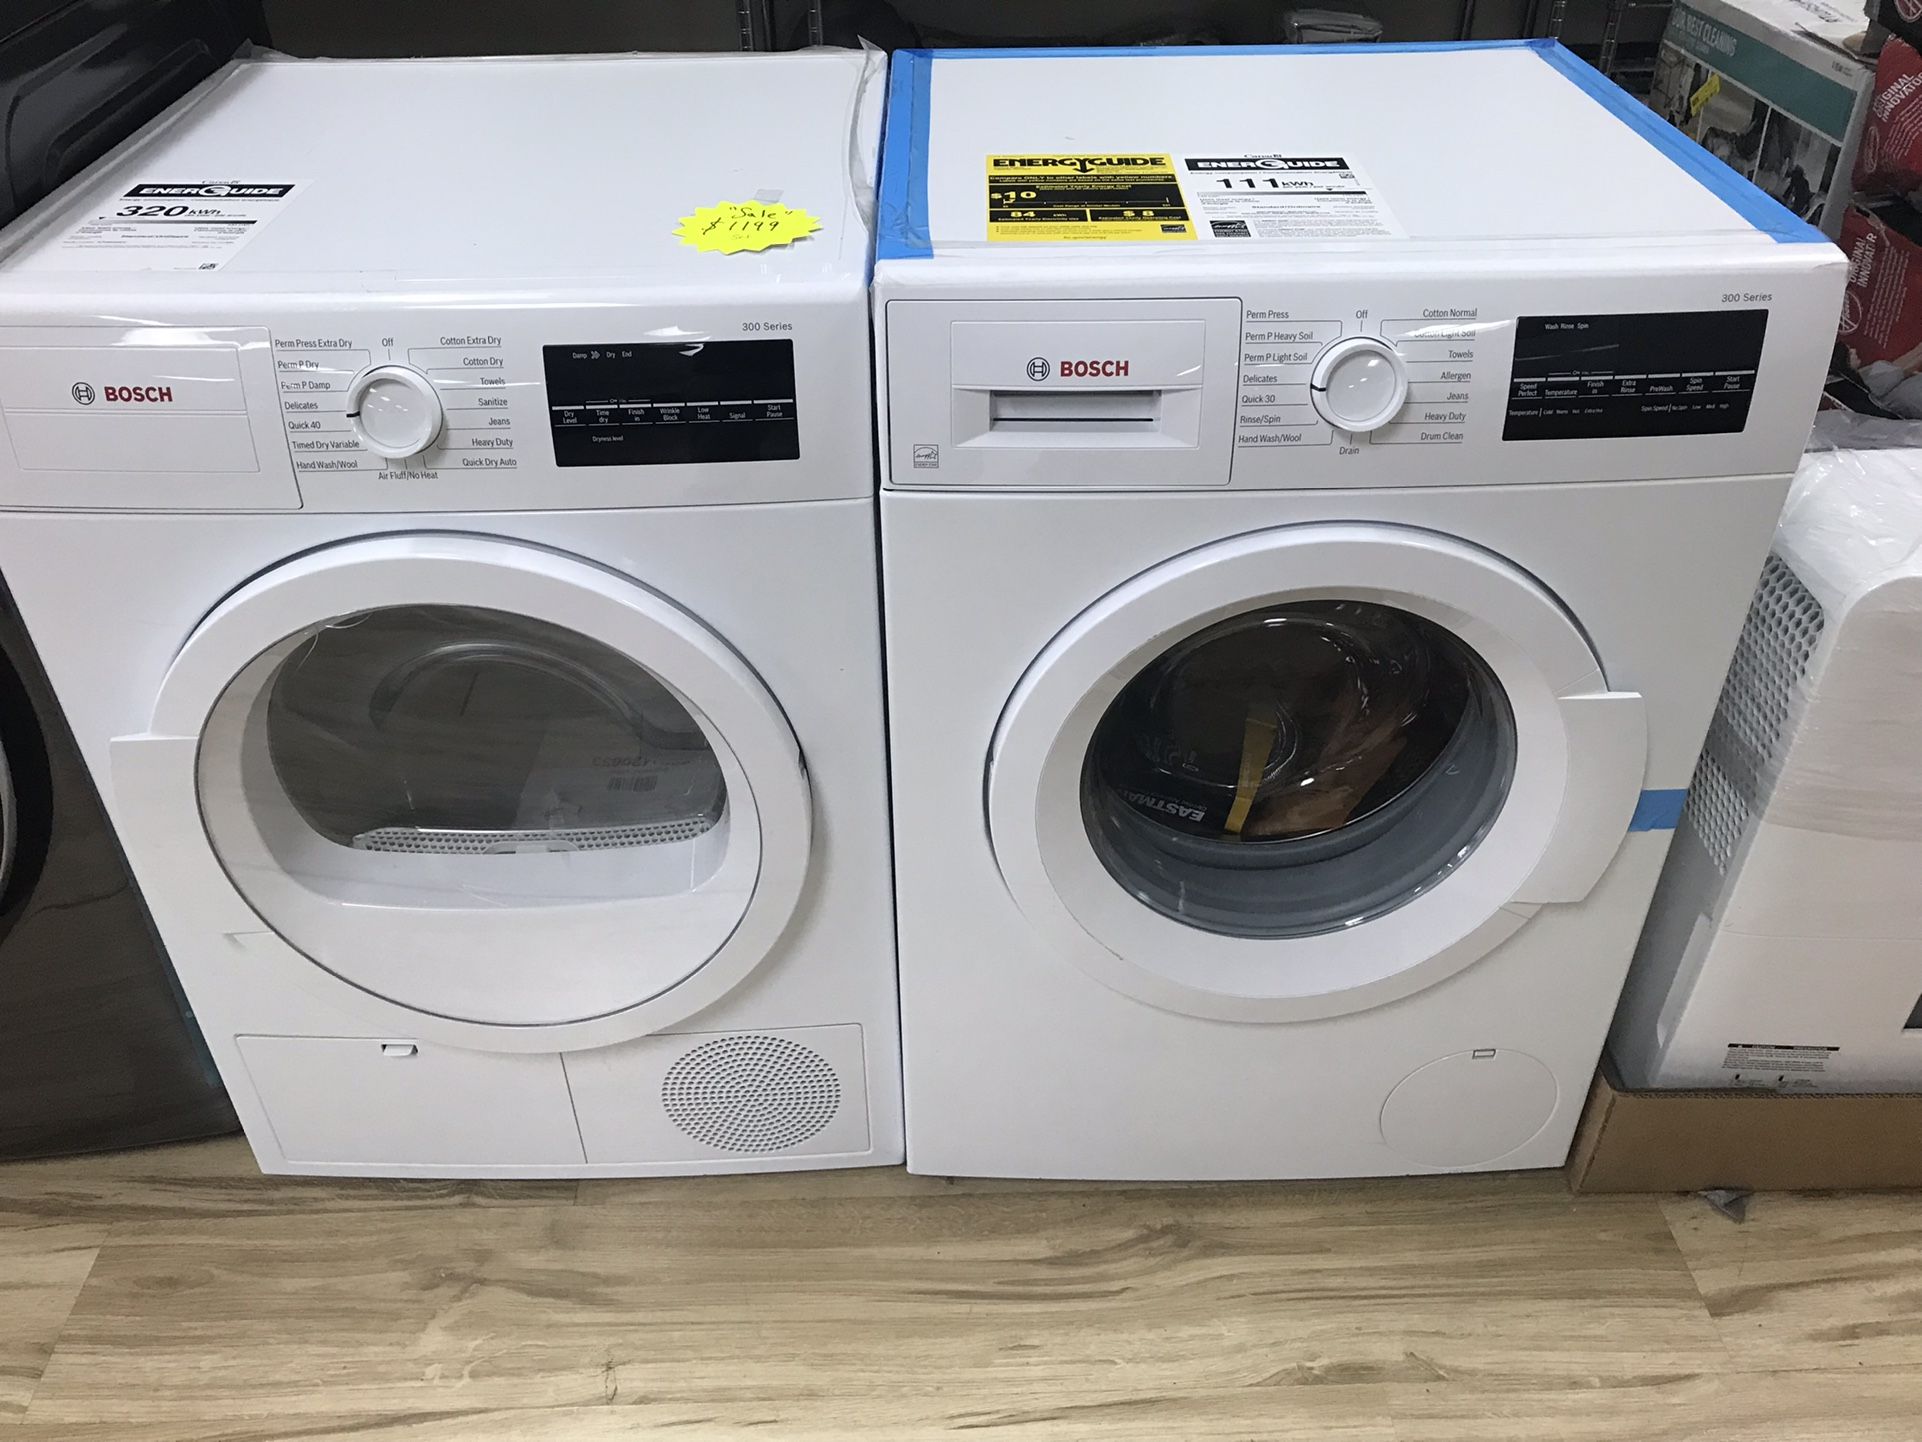 Bosch 300 Series washer and dryer set In White